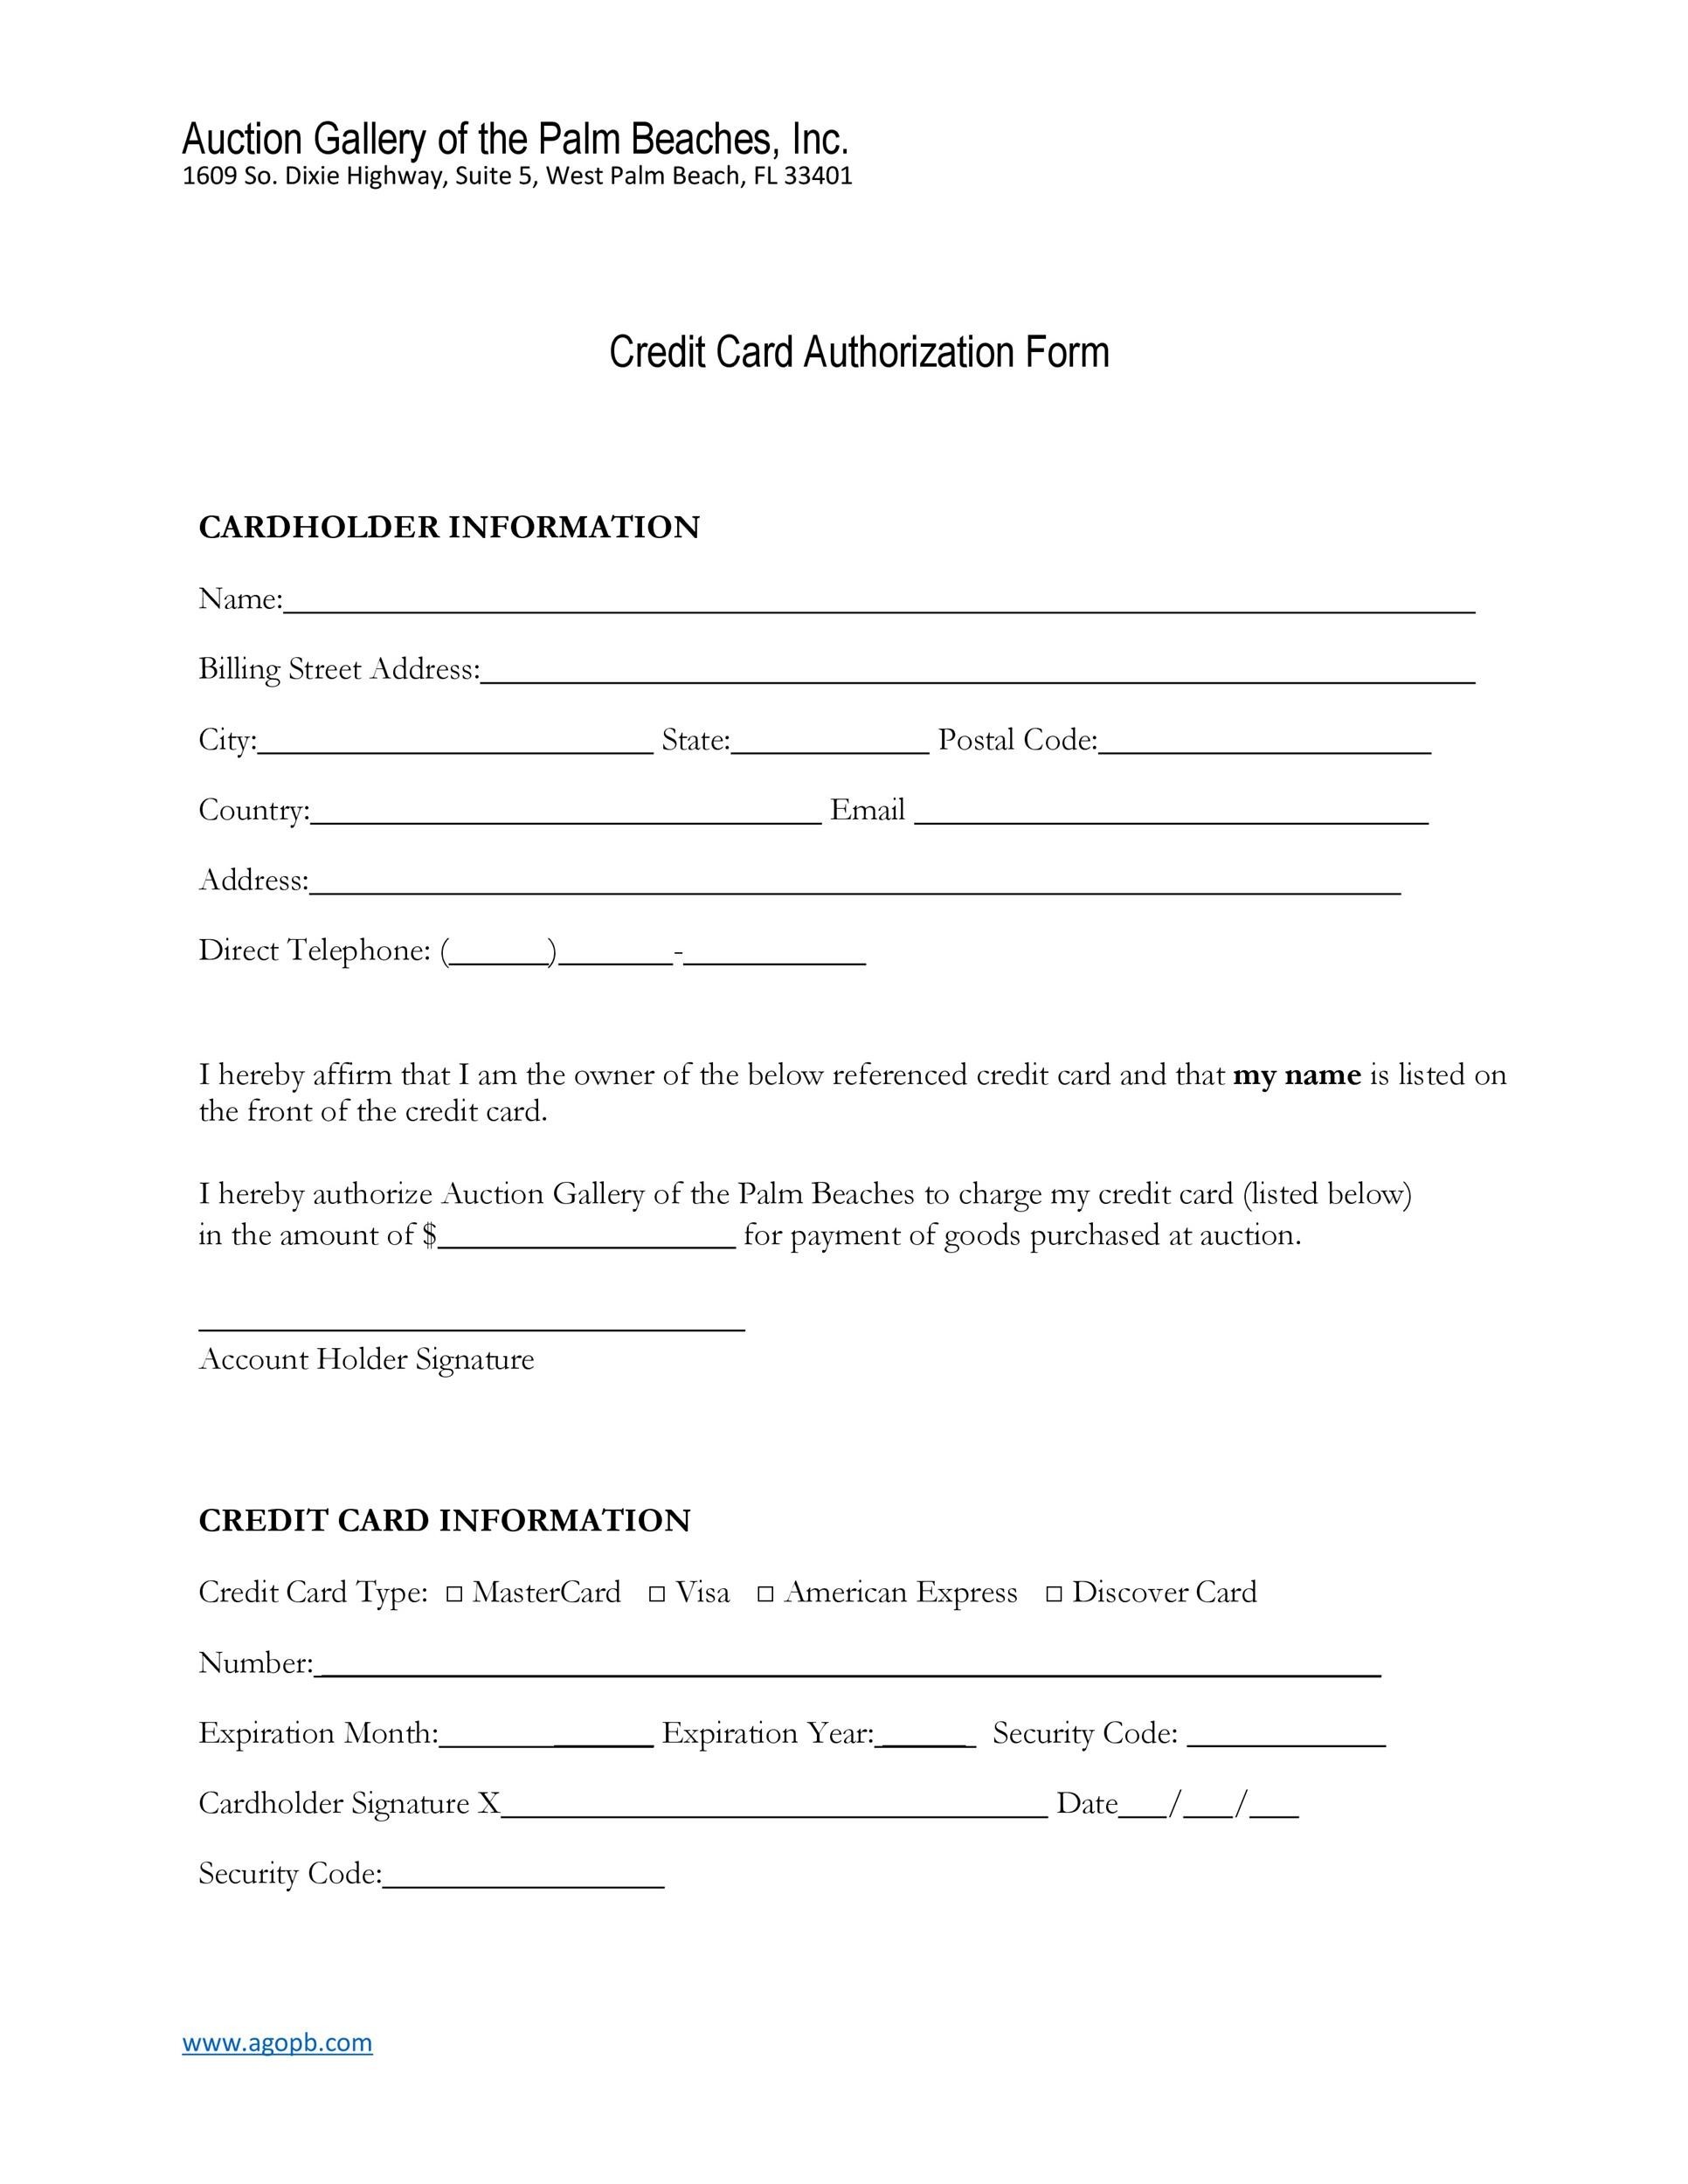 43 Credit Card Authorization Forms Templates Ready-to-Use